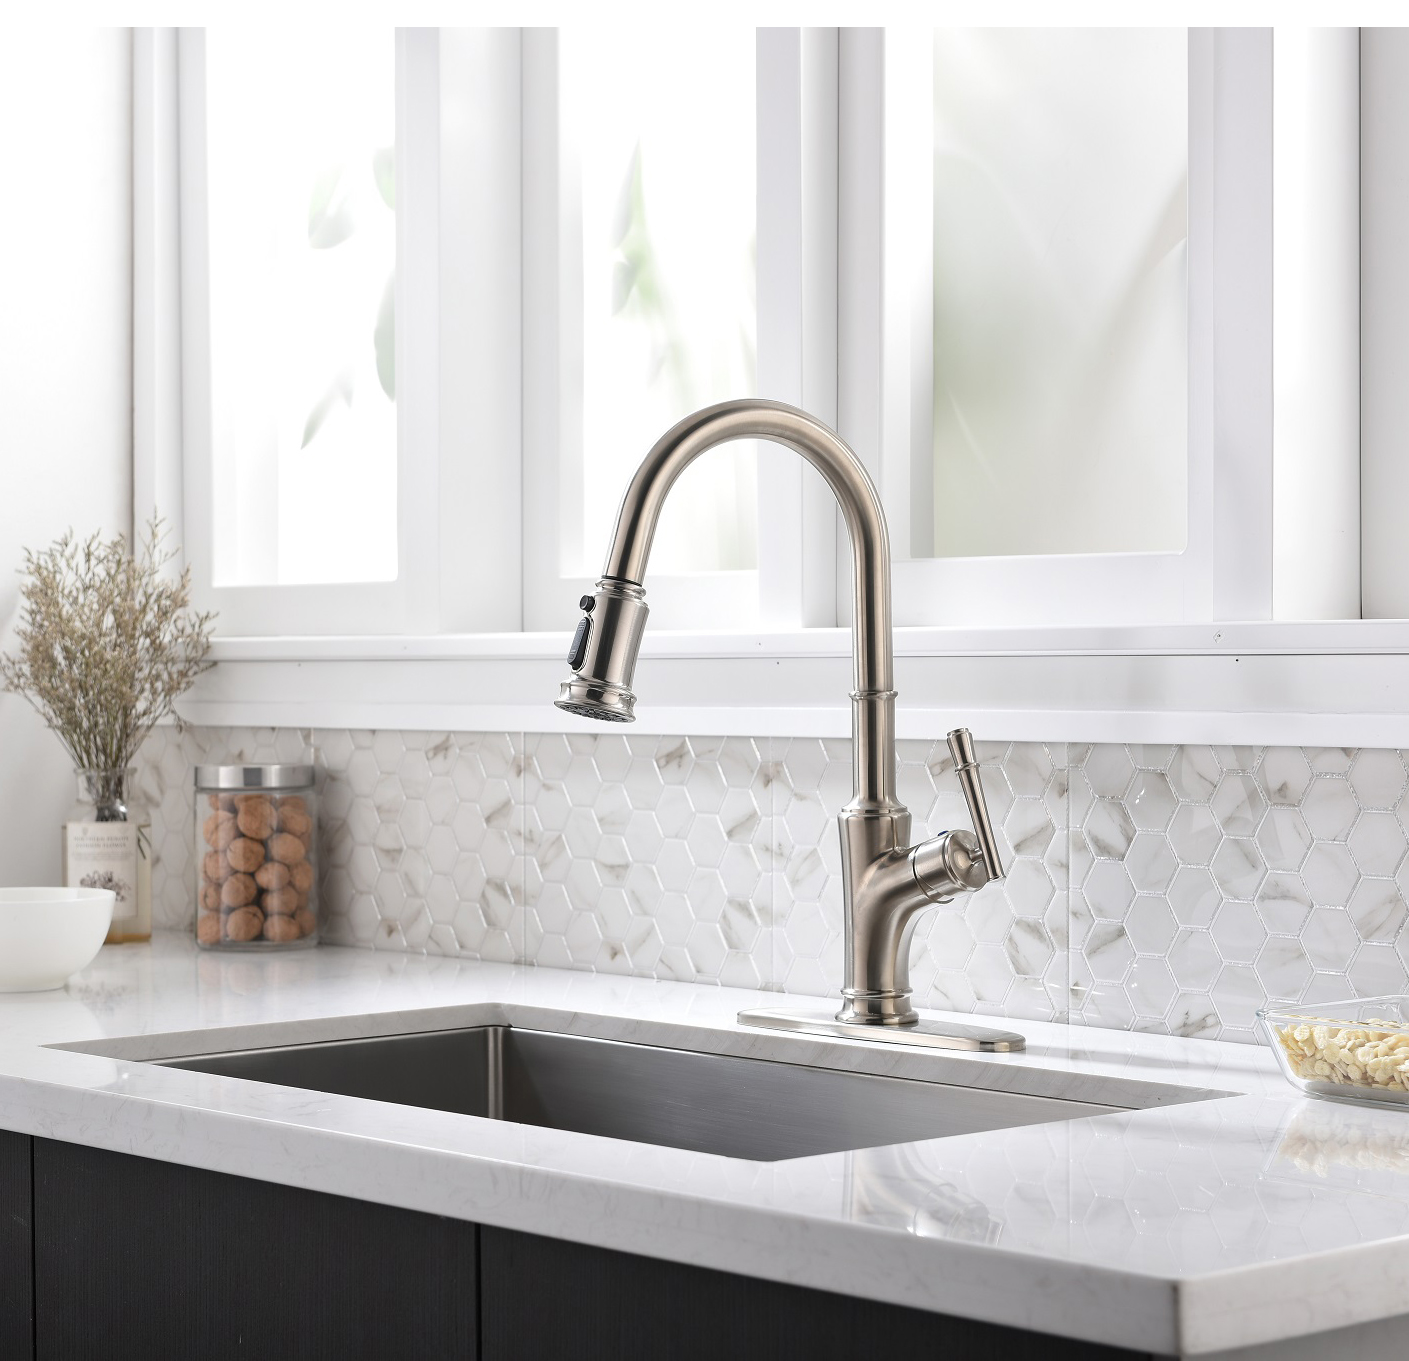 cUPC Brushed Nickle Pull -Down Traditional Kitchen Faucet 